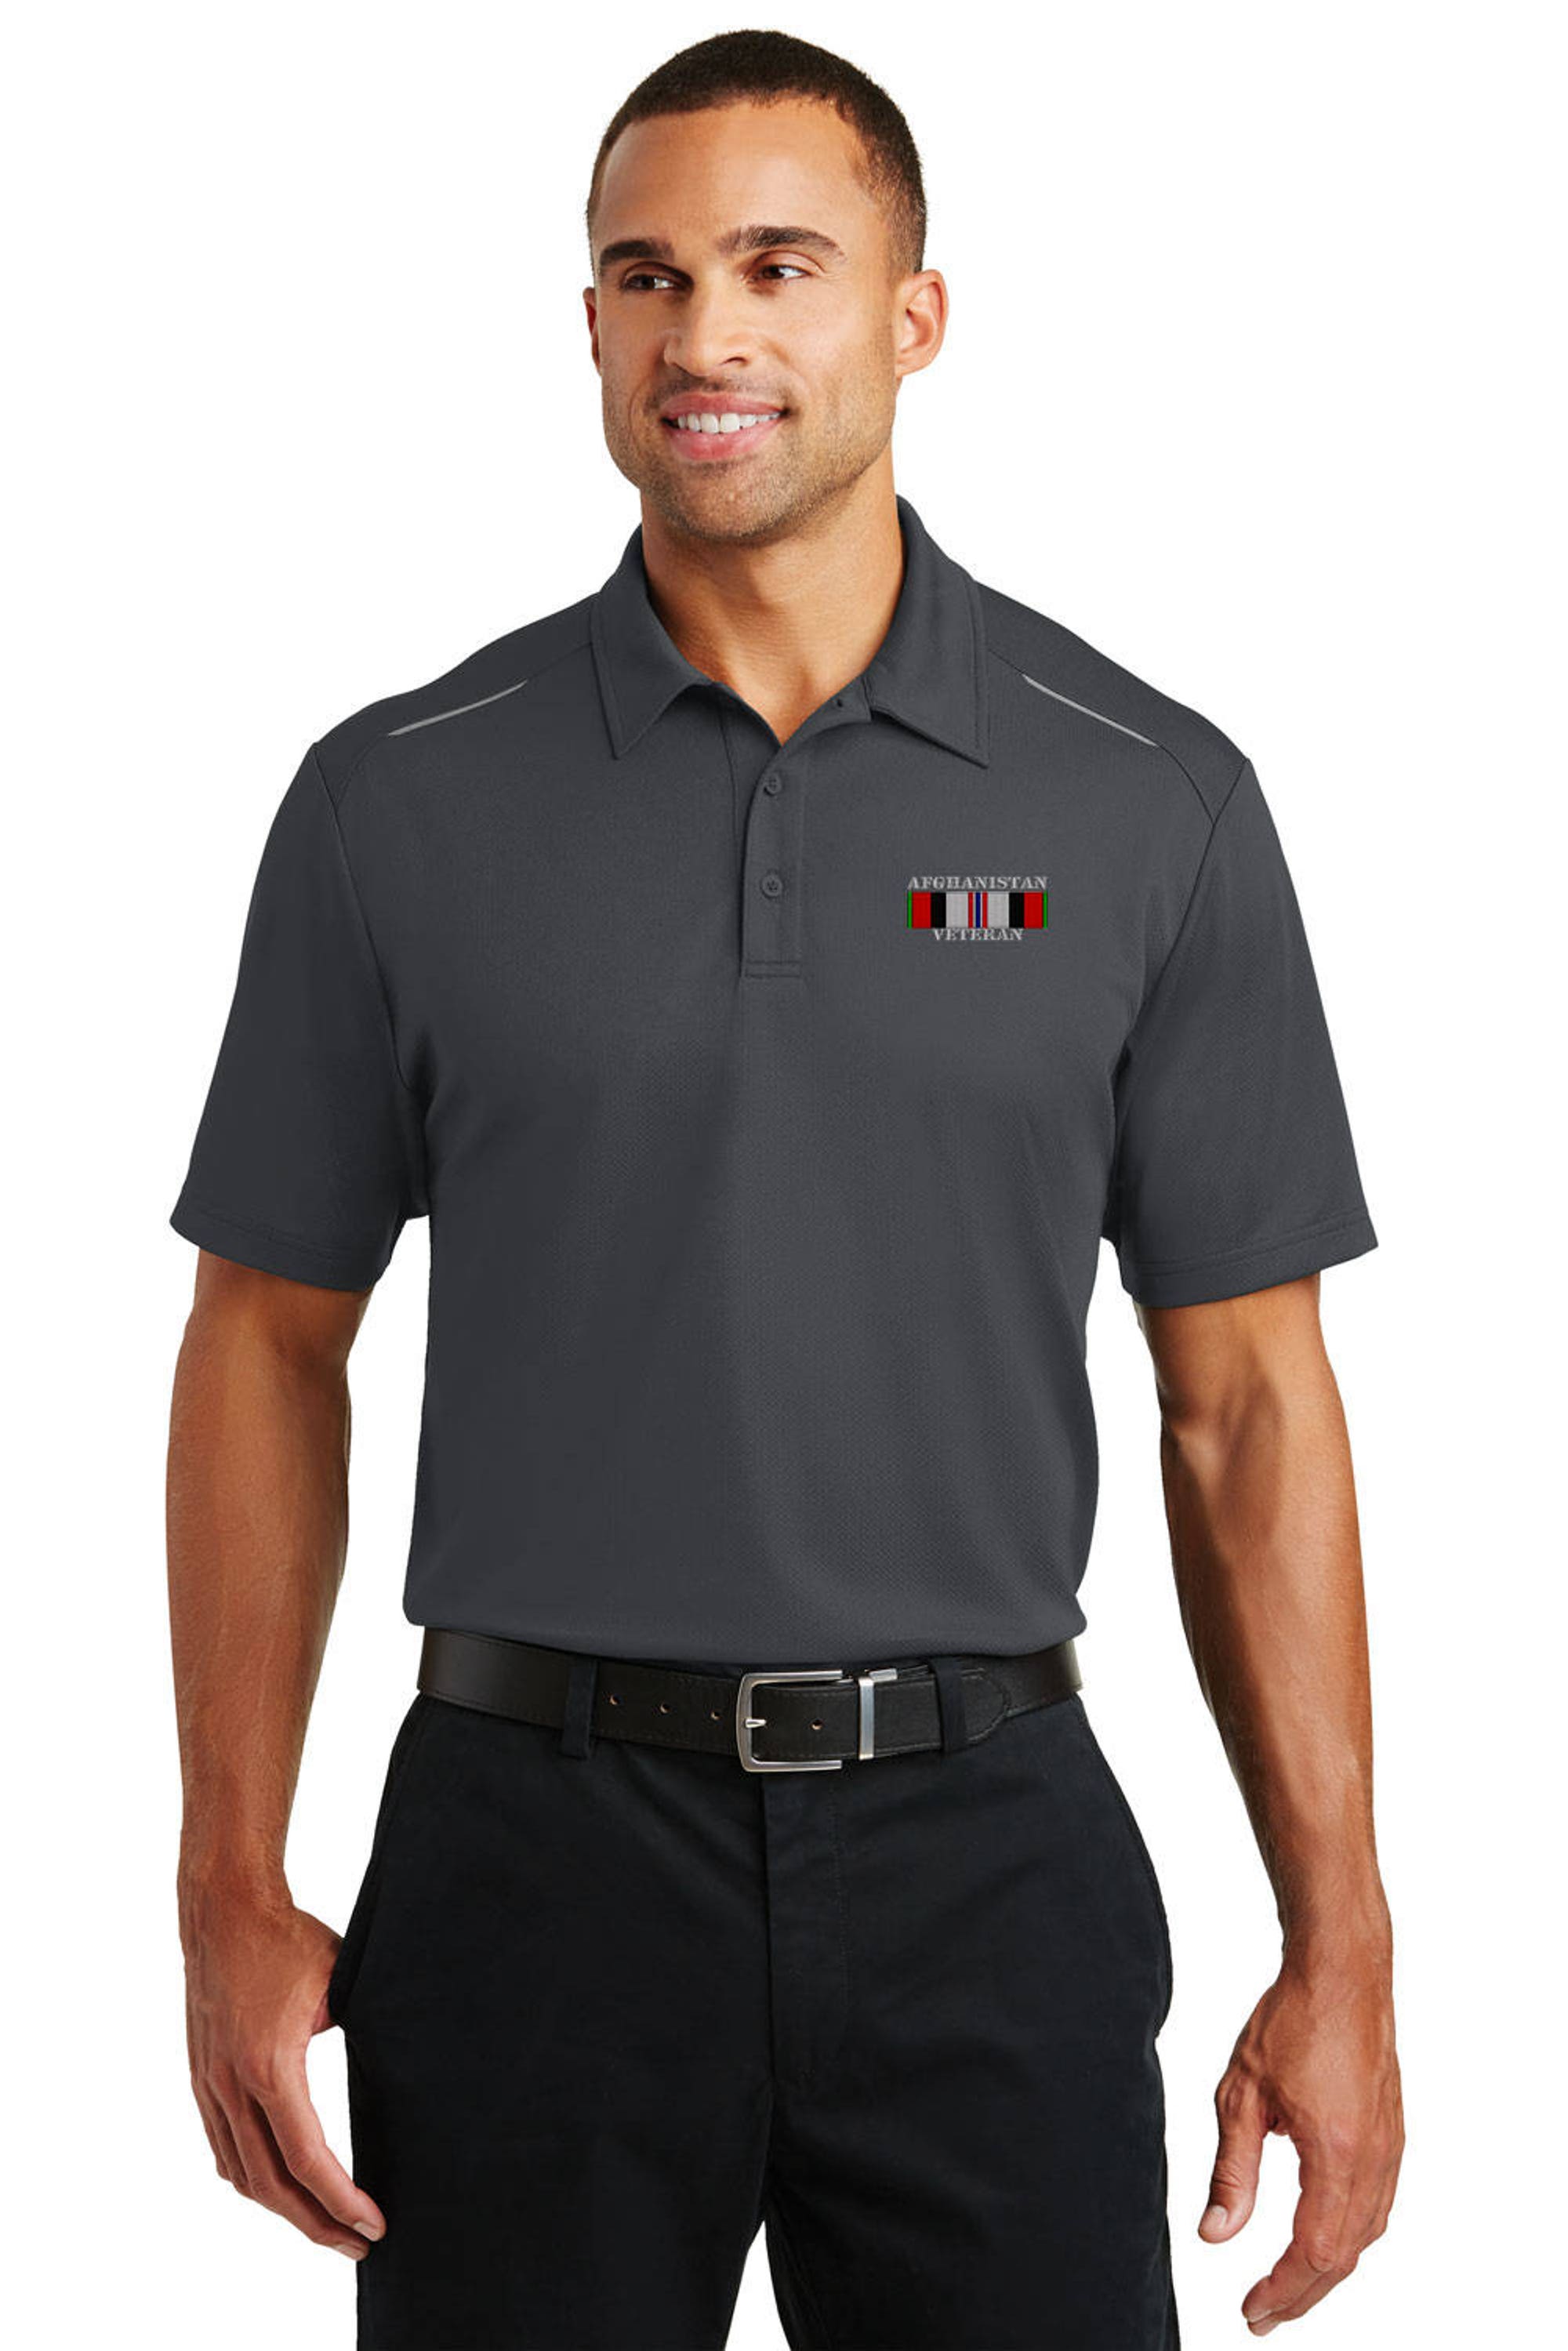 Discover Afghanistan Veteran Embroidered Ribbon Performance Golf Polo